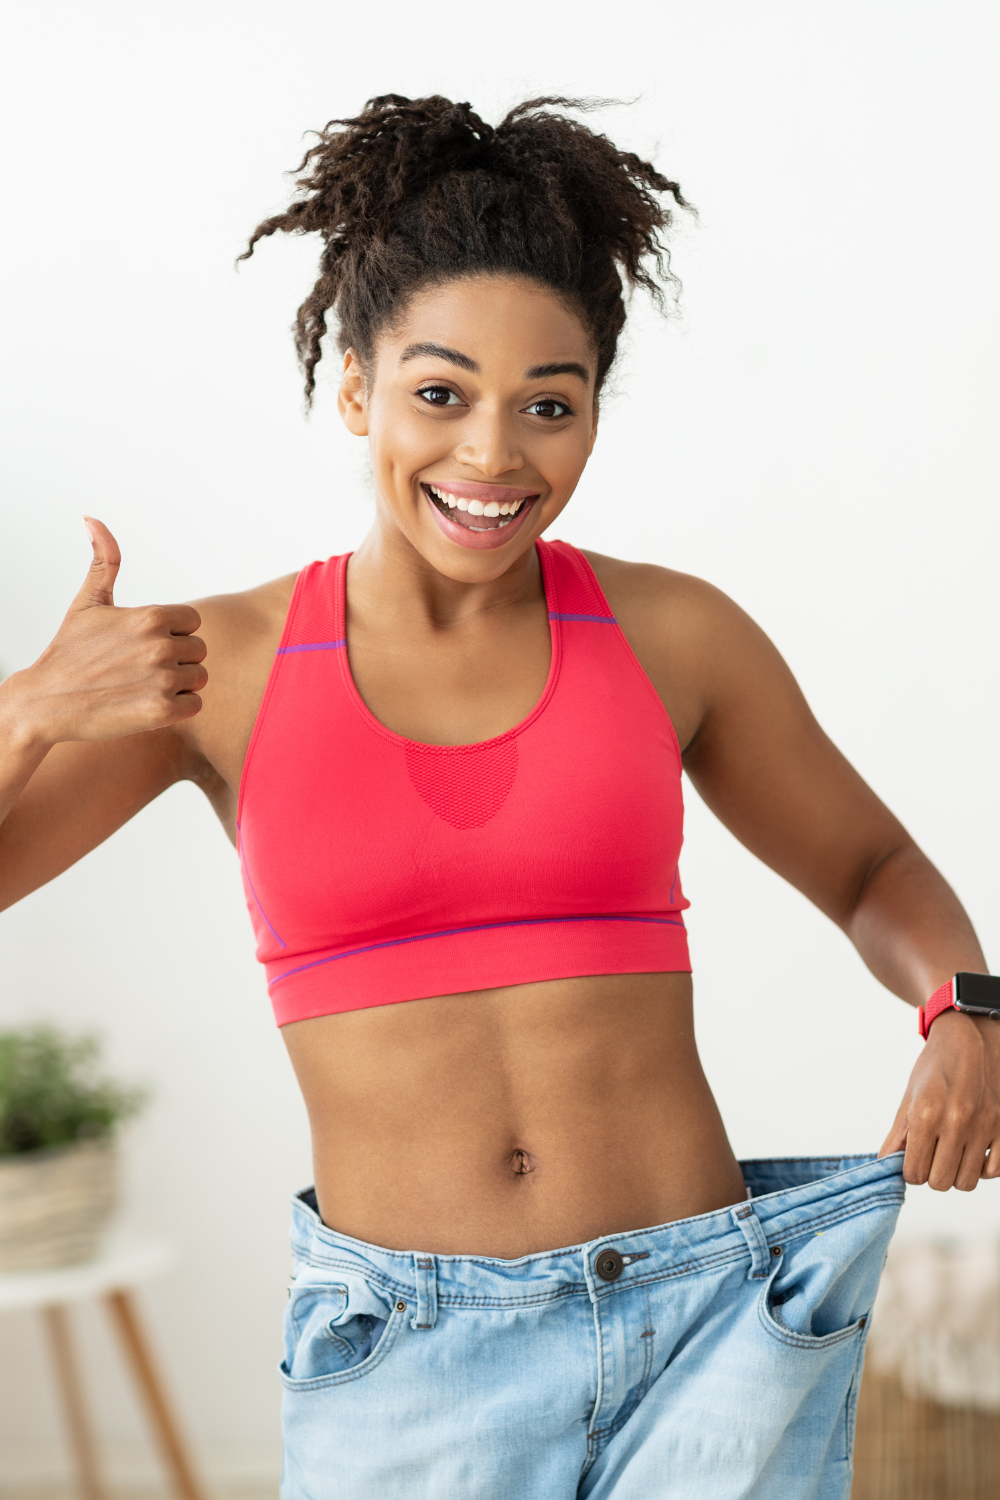 5 Considerations After Achieving Your Weight Loss Goals